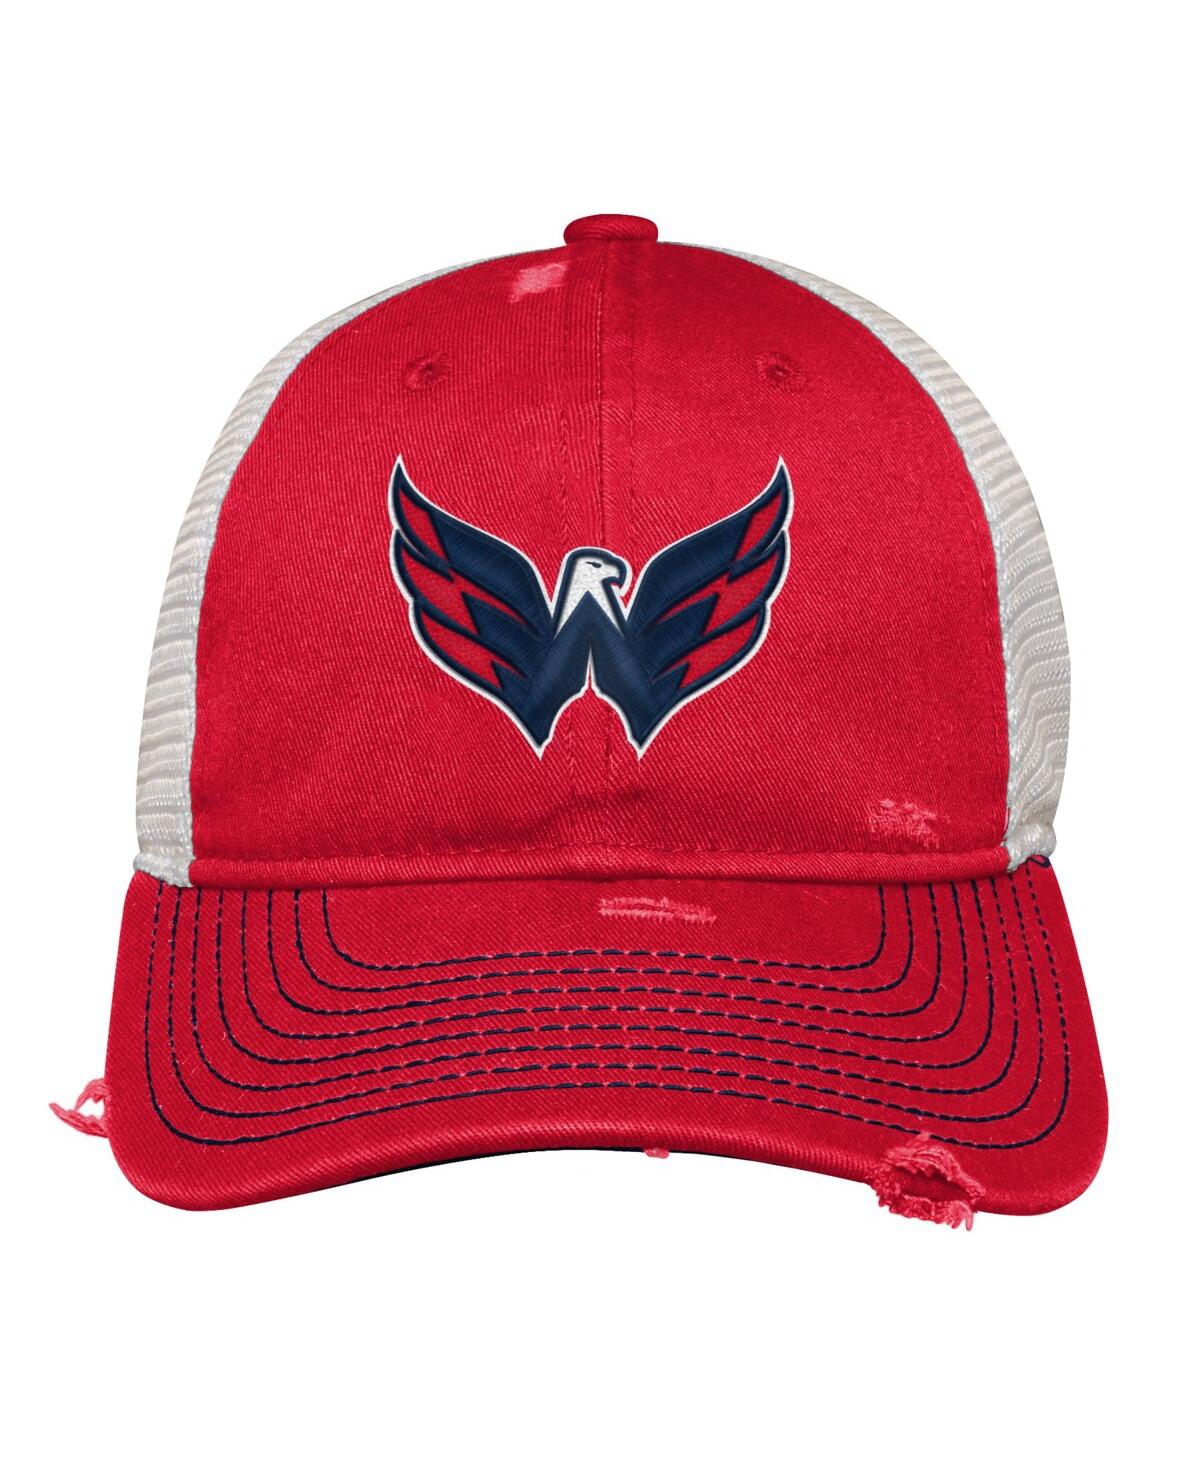 Shop Outerstuff Youth Boys And Girls Red Distressed Washington Capitals Slouch Trucker Adjustable Hat